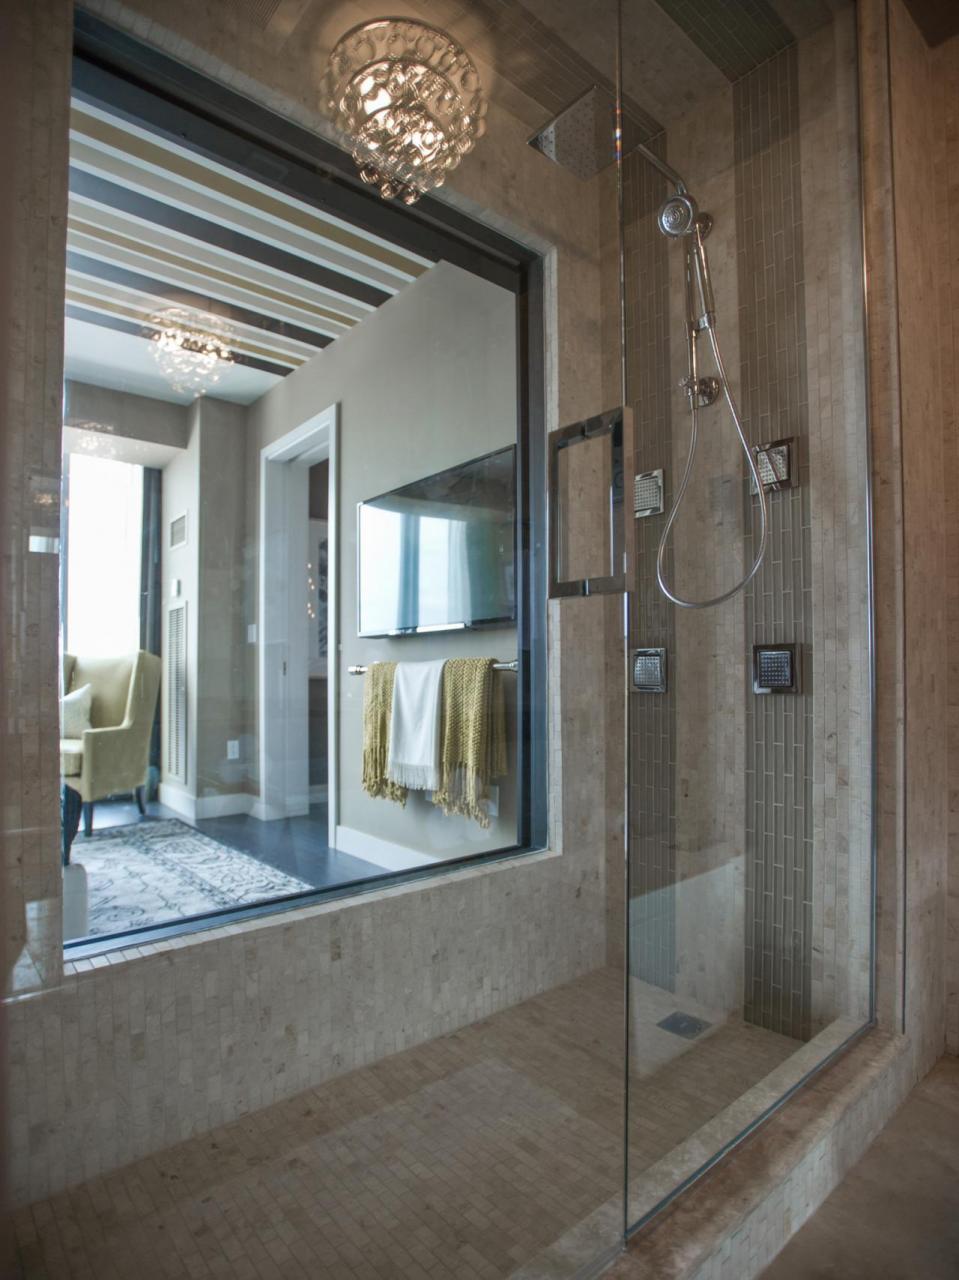 Luxurious Master Bathroom Shower With Tiled Walls HGTV